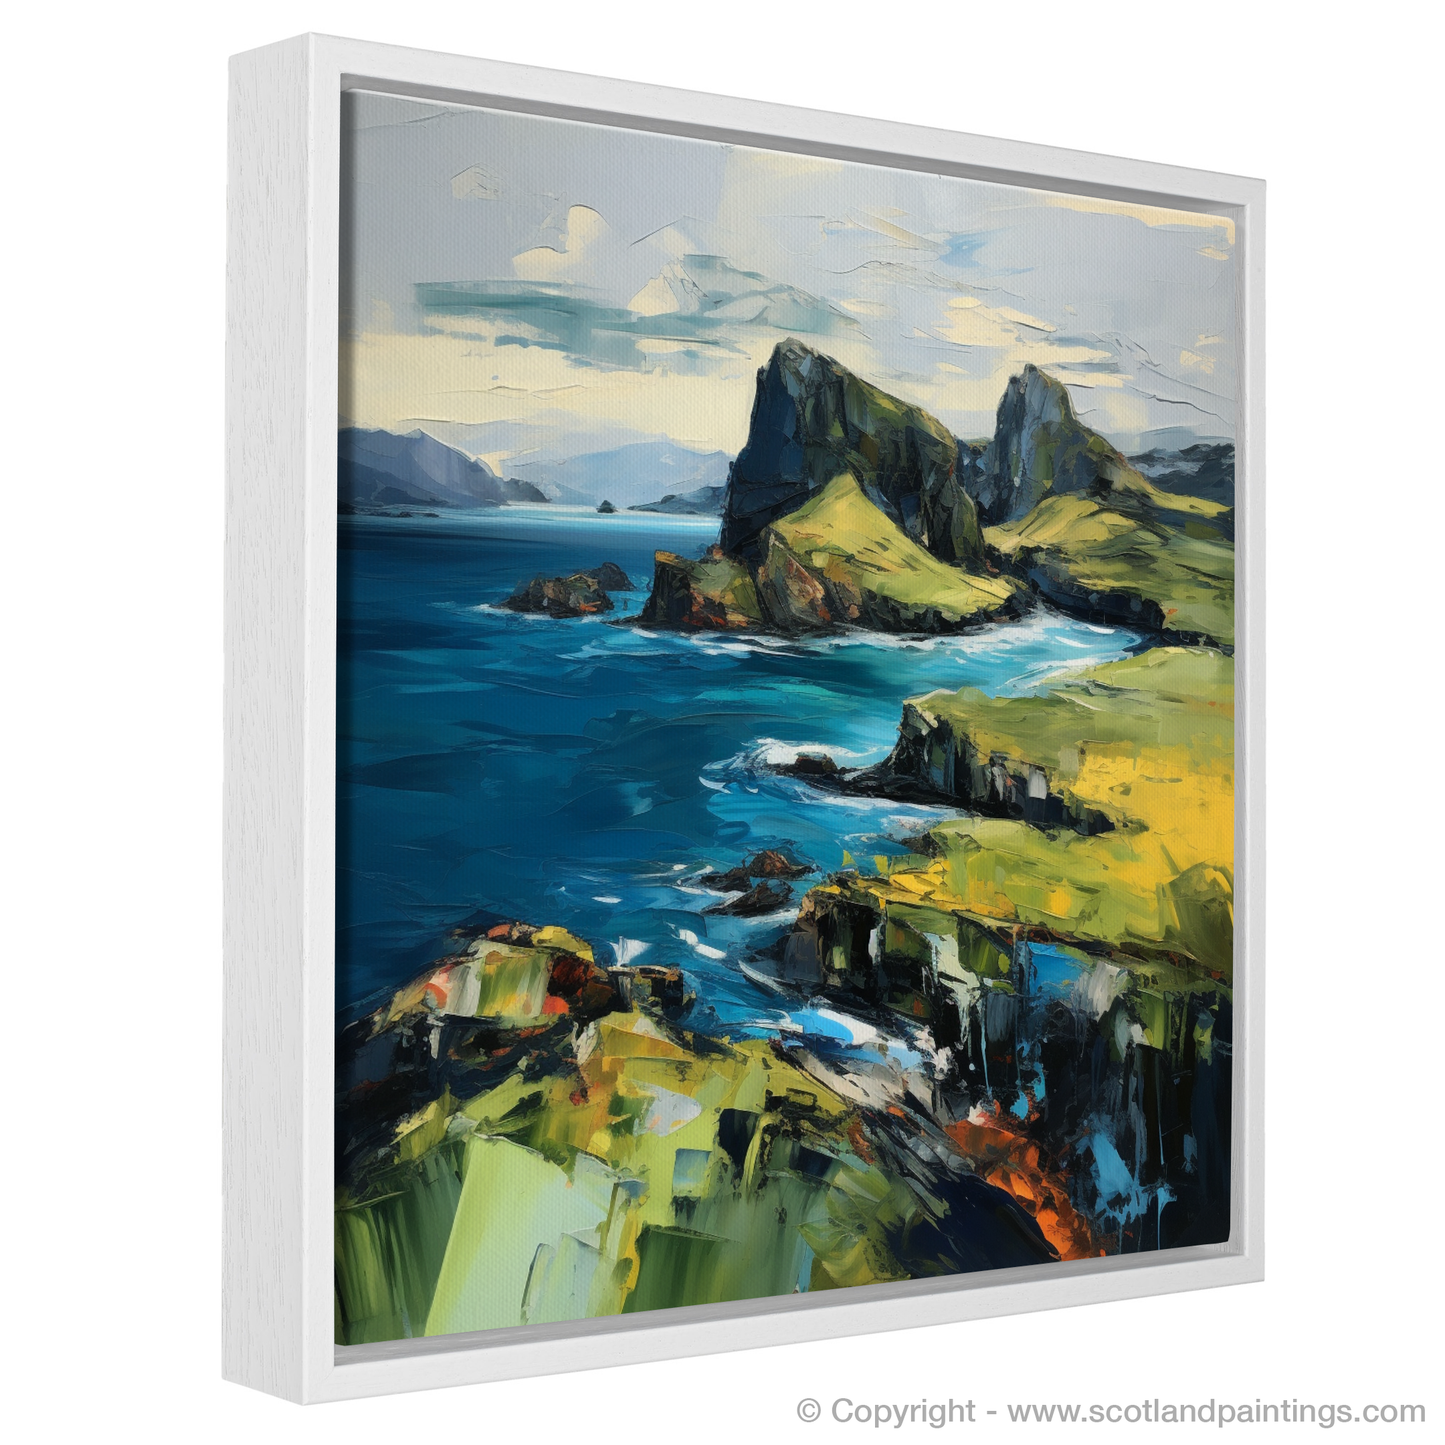 Painting and Art Print of Isle of Skye's smaller isles, Inner Hebrides entitled "Isle of Skye's Enchantment: An Expressionist Journey Through Land and Sea".